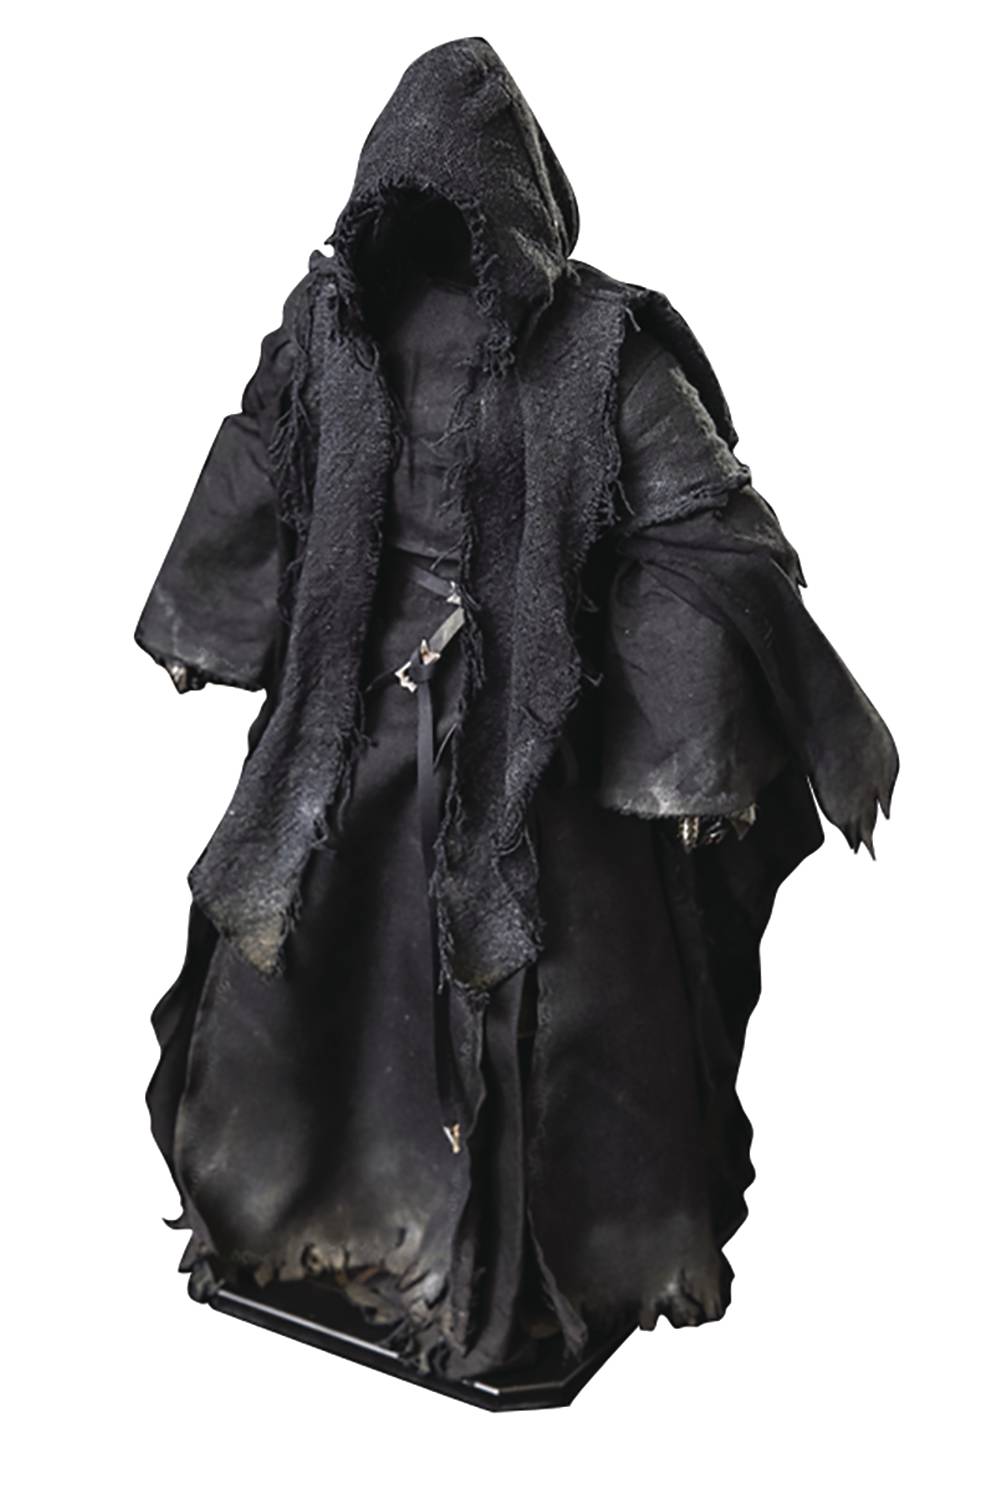 LORD OF THE RINGS NAZGUL 1/6 AF